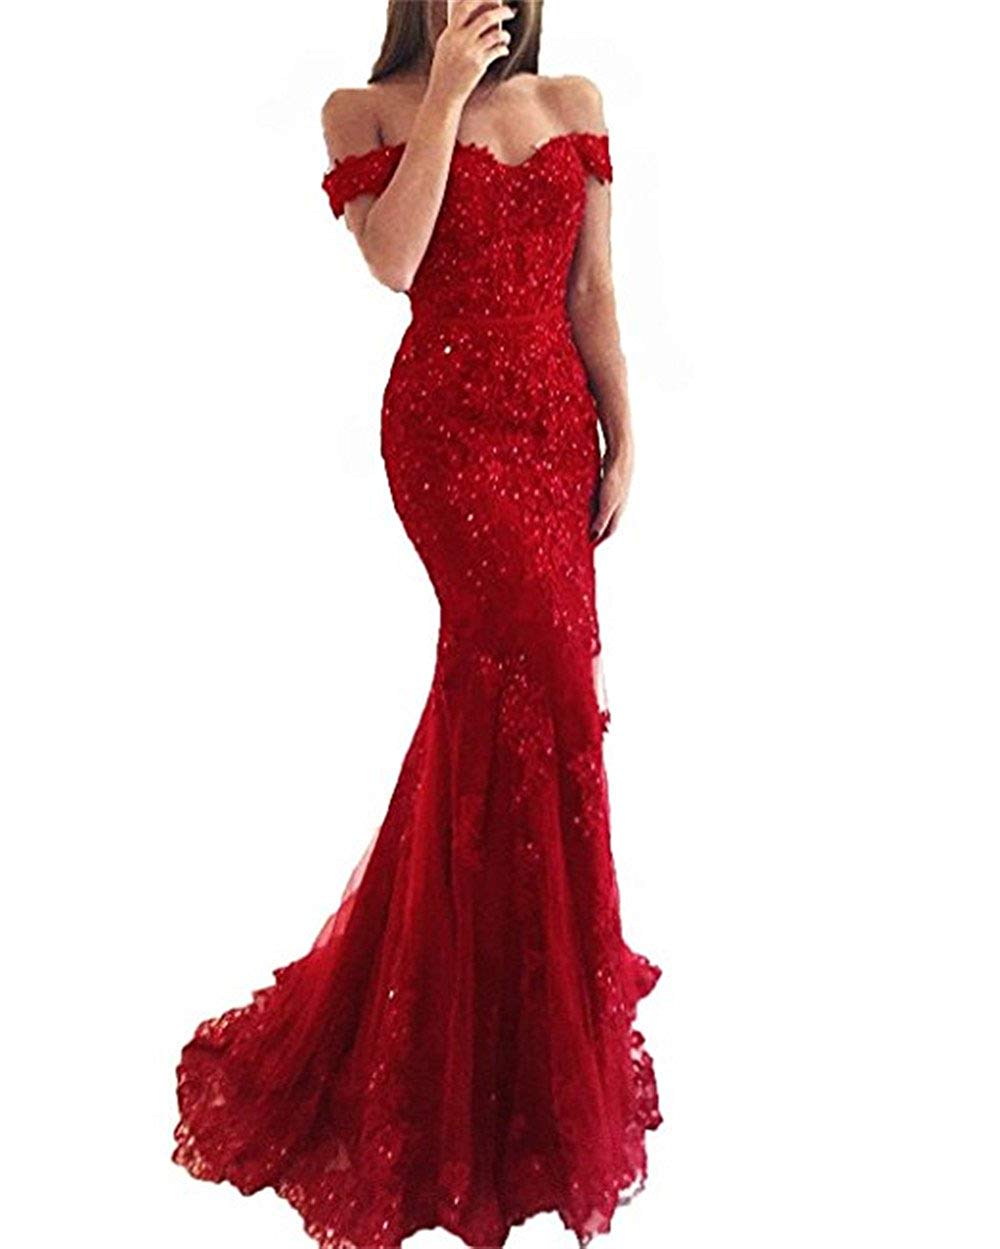 Junoesque Burgundy Lace Mermaid Prom Dresses Appliques Off the Shoulder Beaded Sequins Long Prom Gowns Evening Dresses BM0449